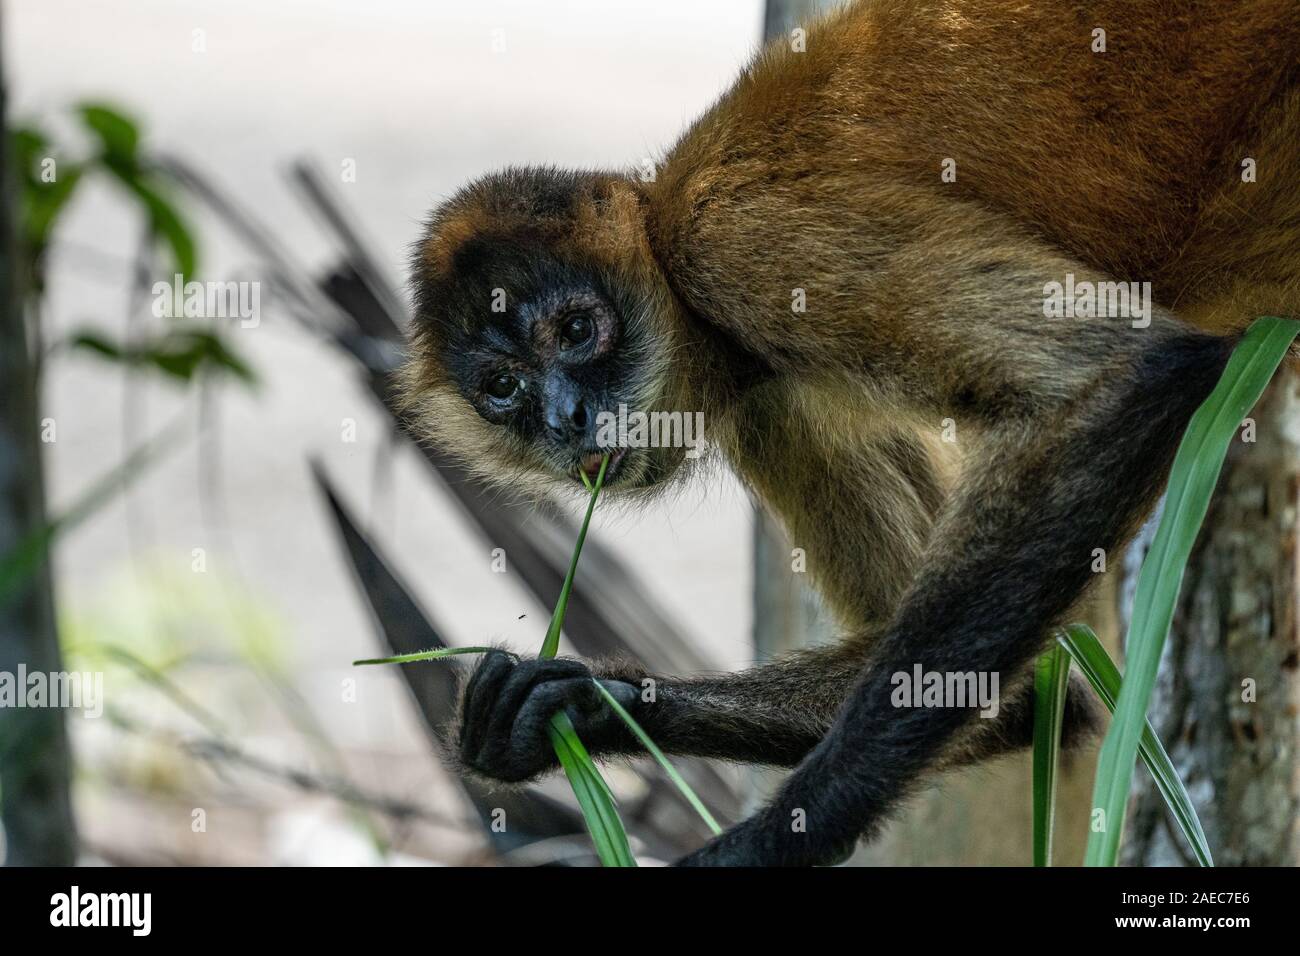 close up portrait of a Geoffroy's spider monkey (Ateles geoffroyi), also known as the black-handed spider monkey, is a species of spider monkey, a typ Stock Photo